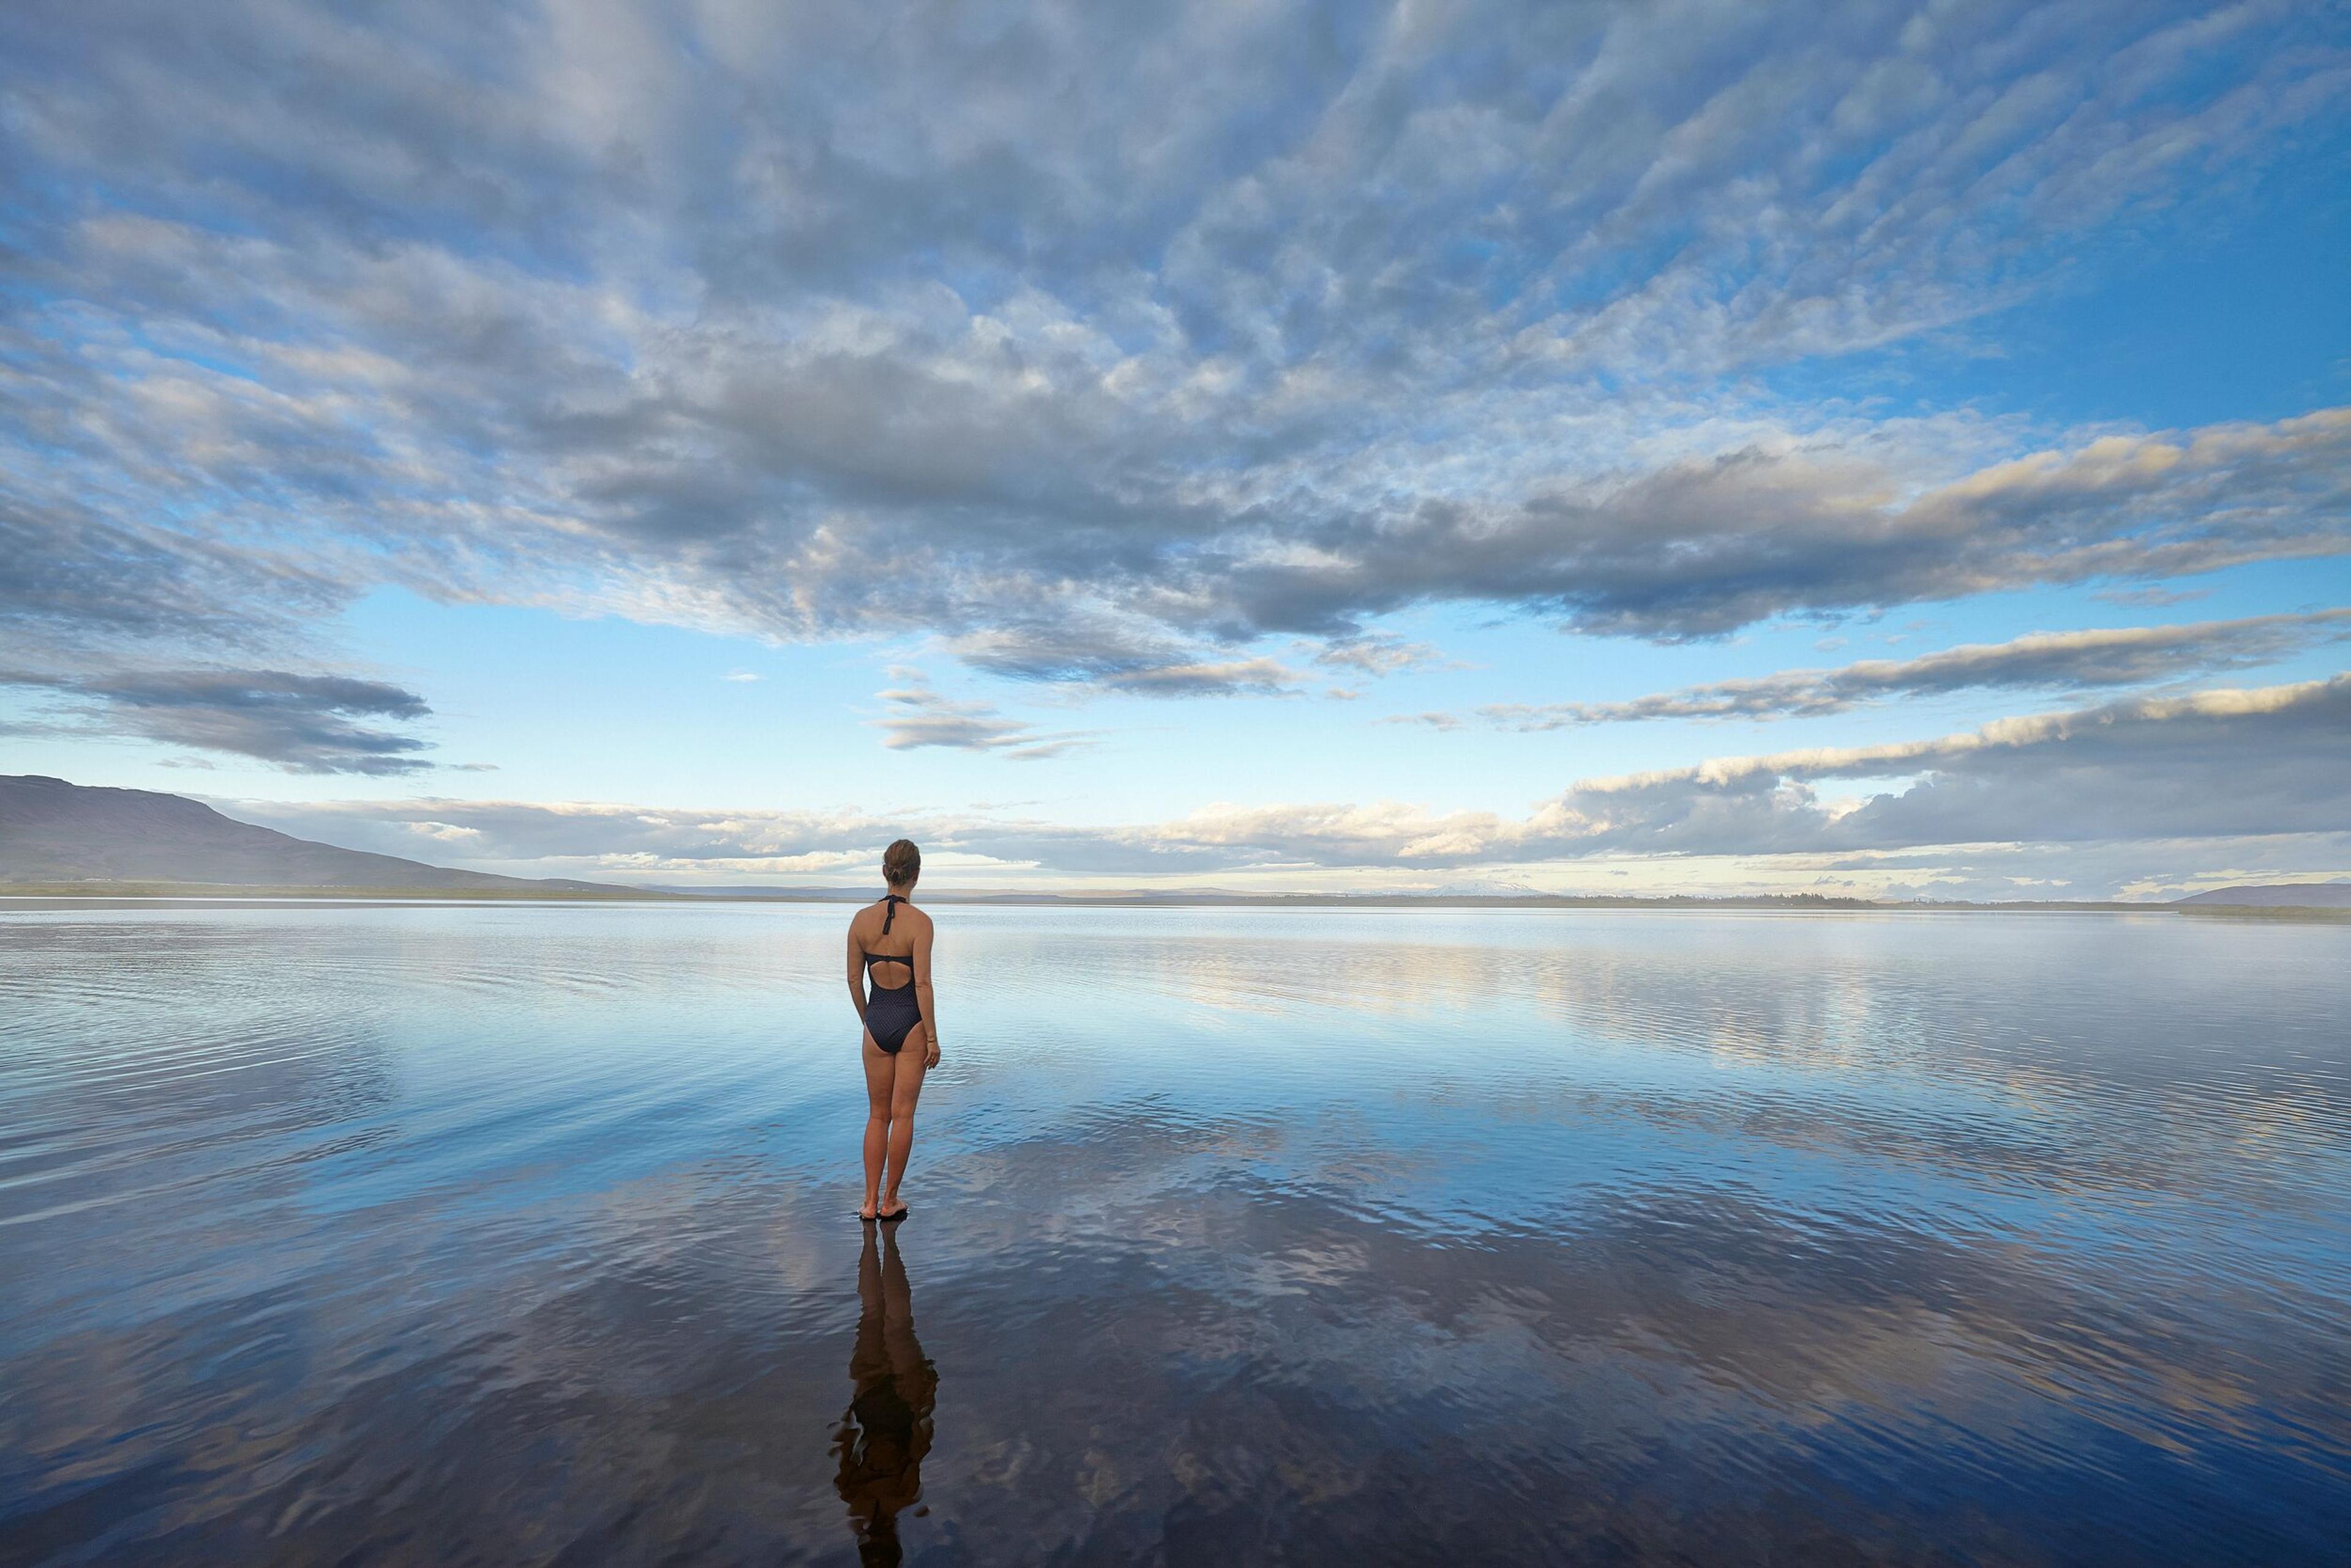 A lone individual standing in still waters, with a perfect reflection of a dramatic sky above, in a landscape that exudes tranquility and the vastness of nature.